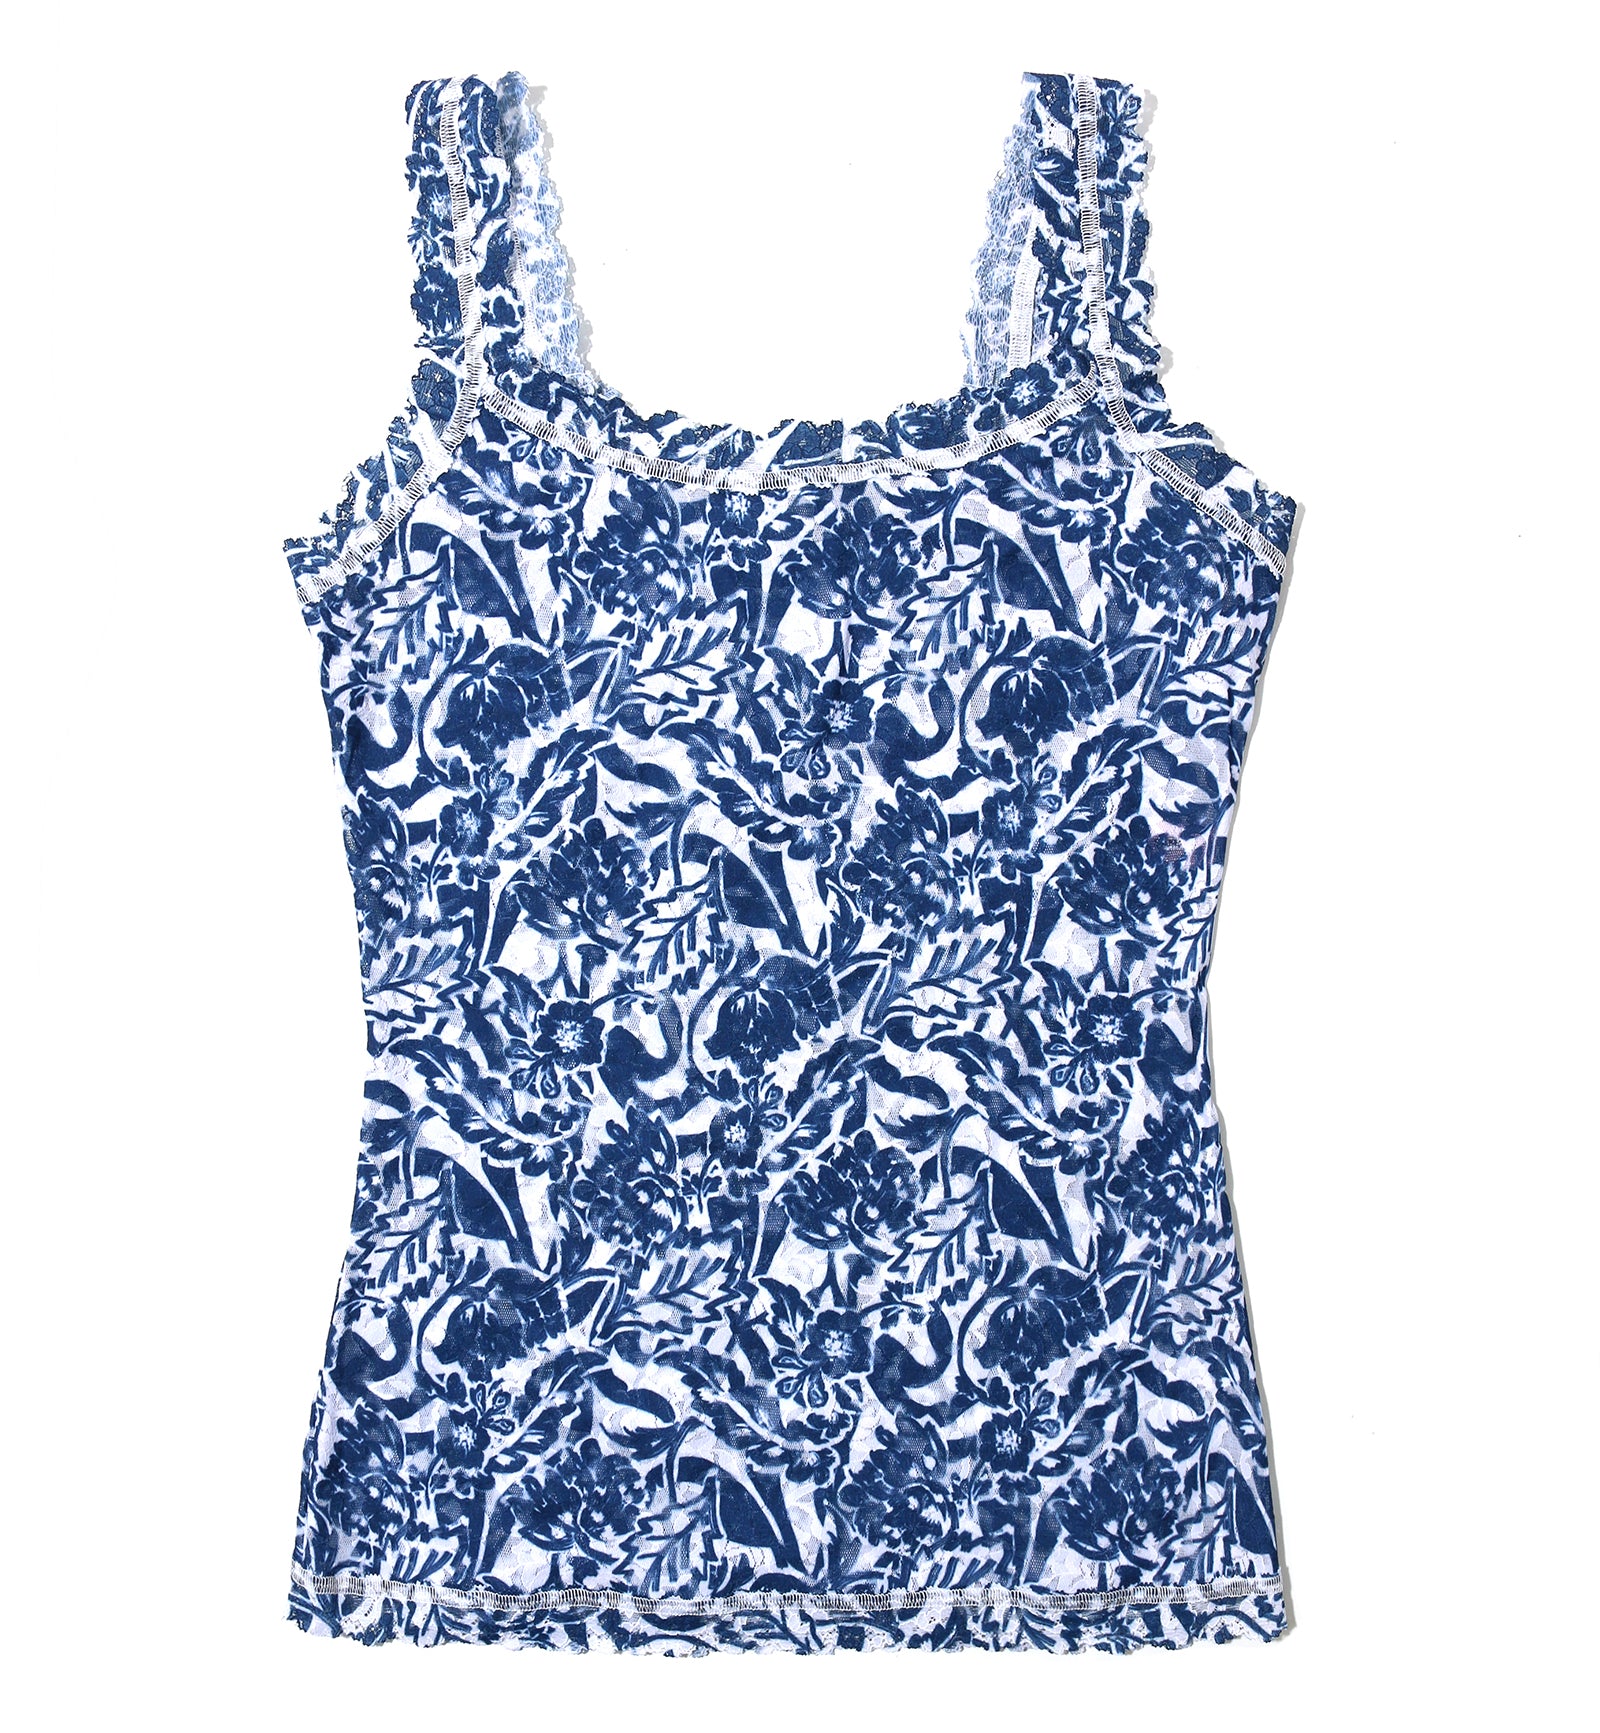 Hanky Panky Signature Lace Printed Unlined Camisole (PR1390L),XS,Sketchbook Floral - Sketchbook Floral,XS